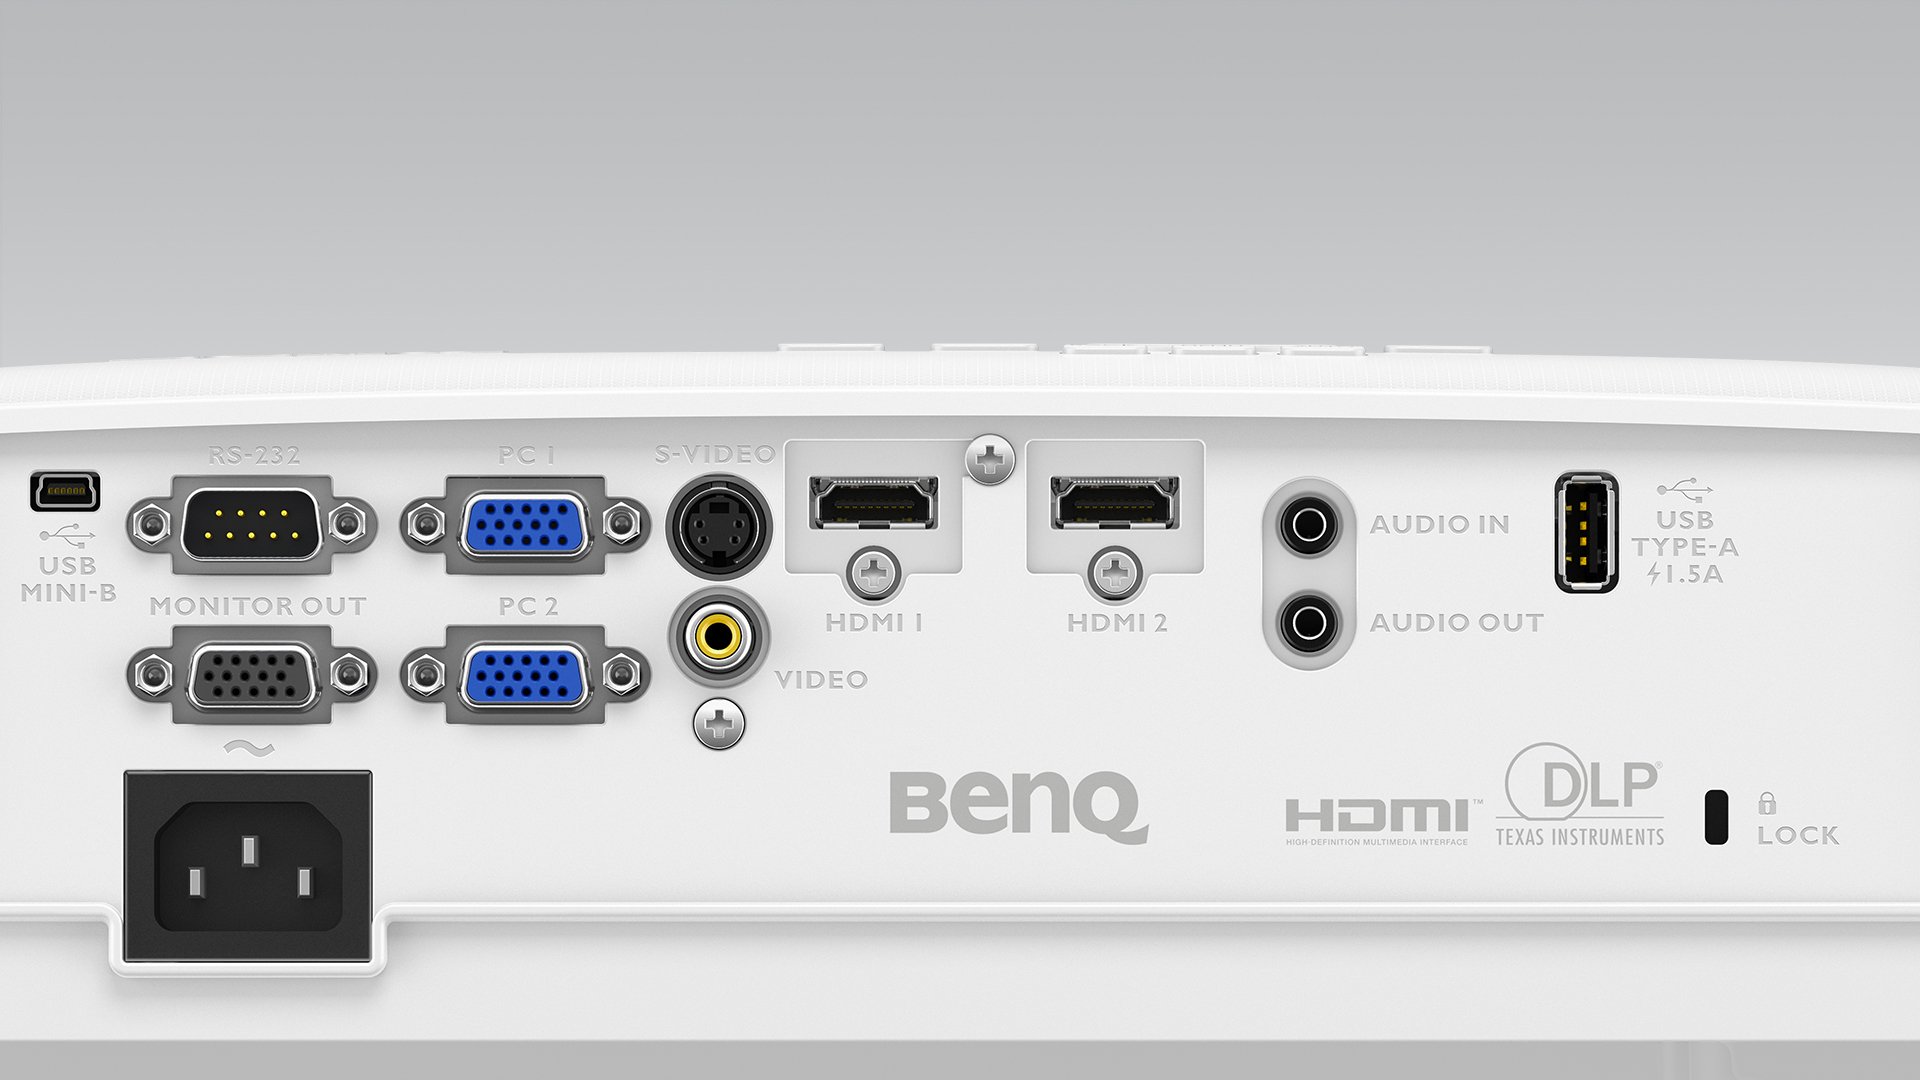 BenQ MH536 io port is with reliable transmission and versatile connectivity